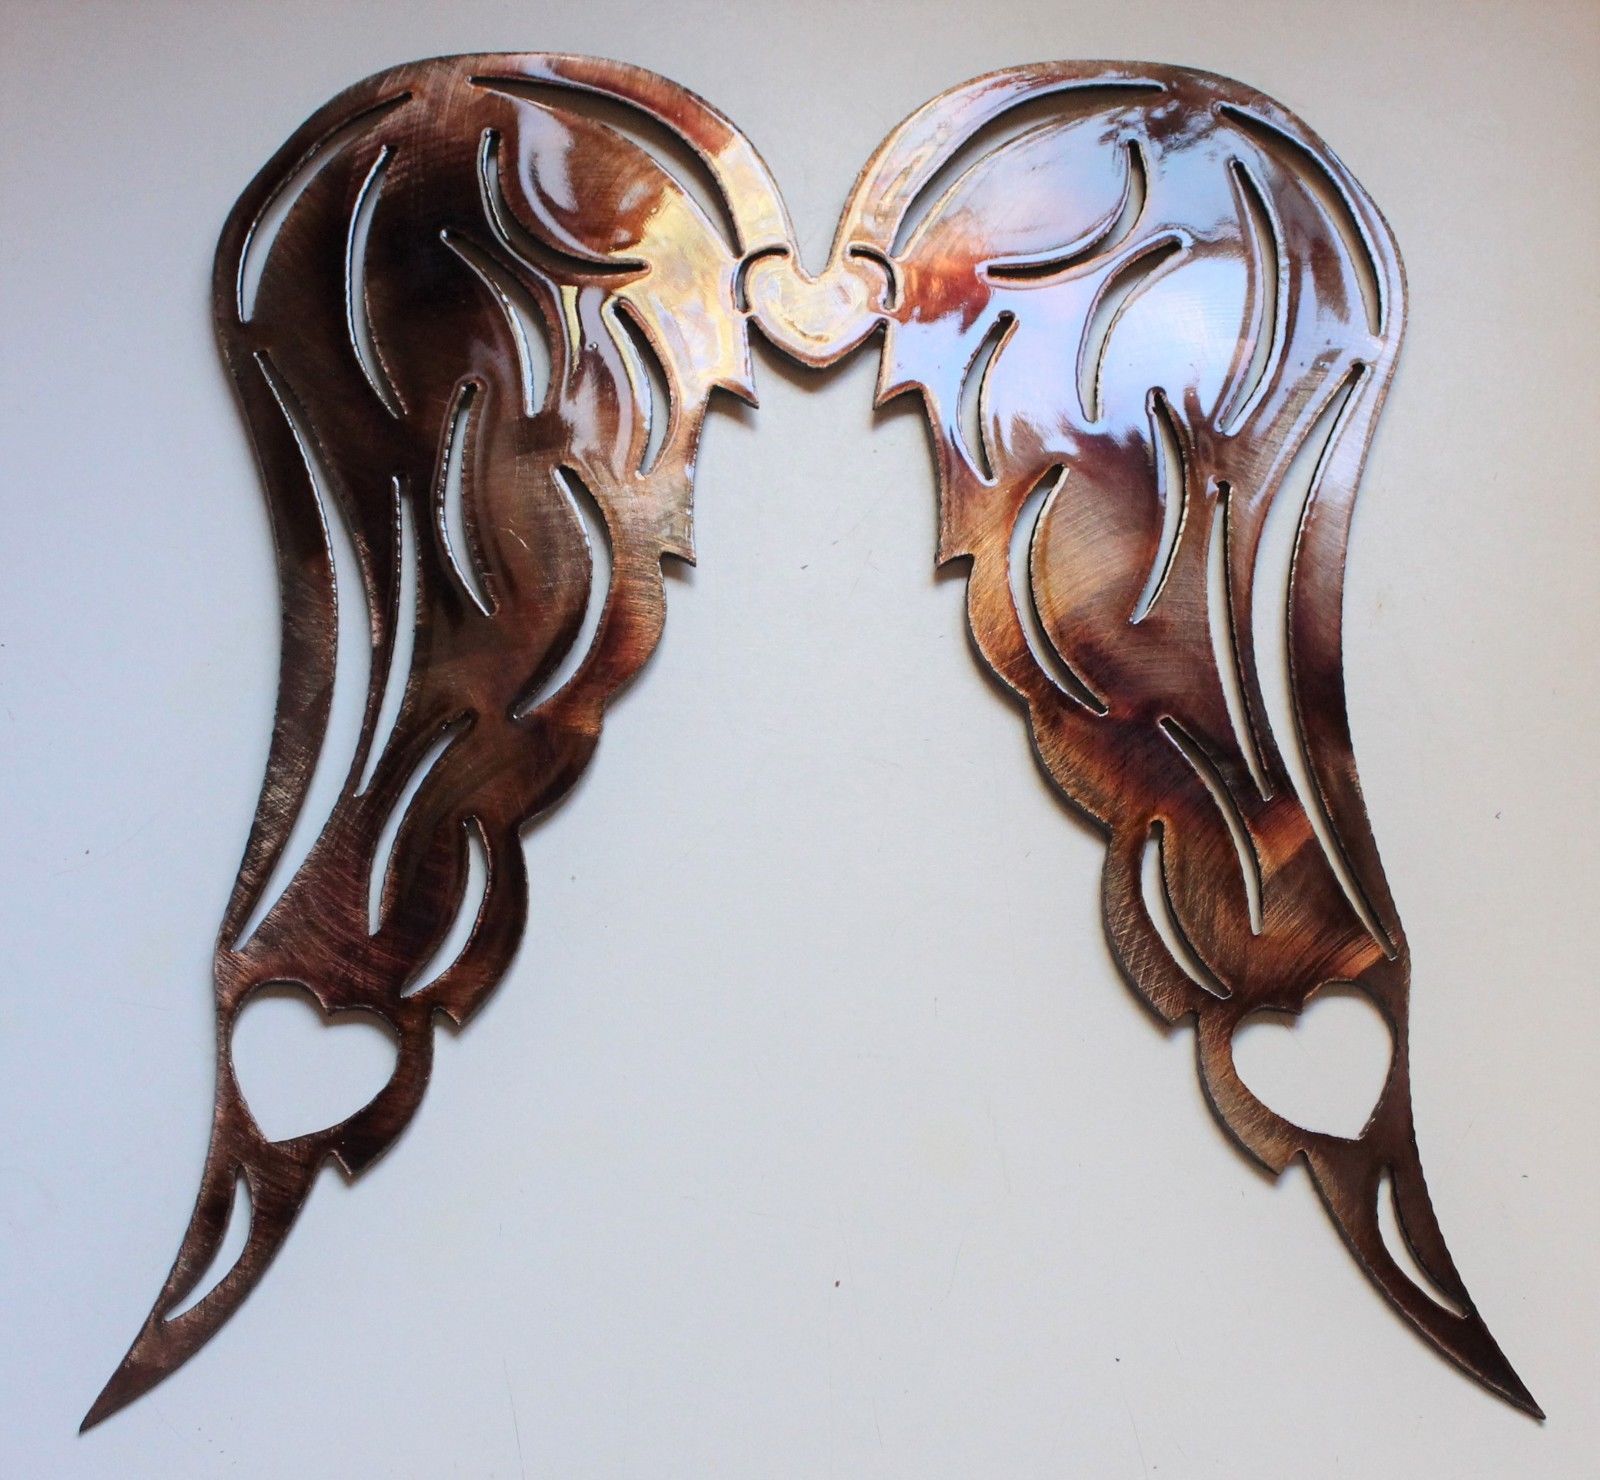 Primary image for Heart Wings Metal Wall Decor Copper/Bronze Plated 12" x 10 1/2"